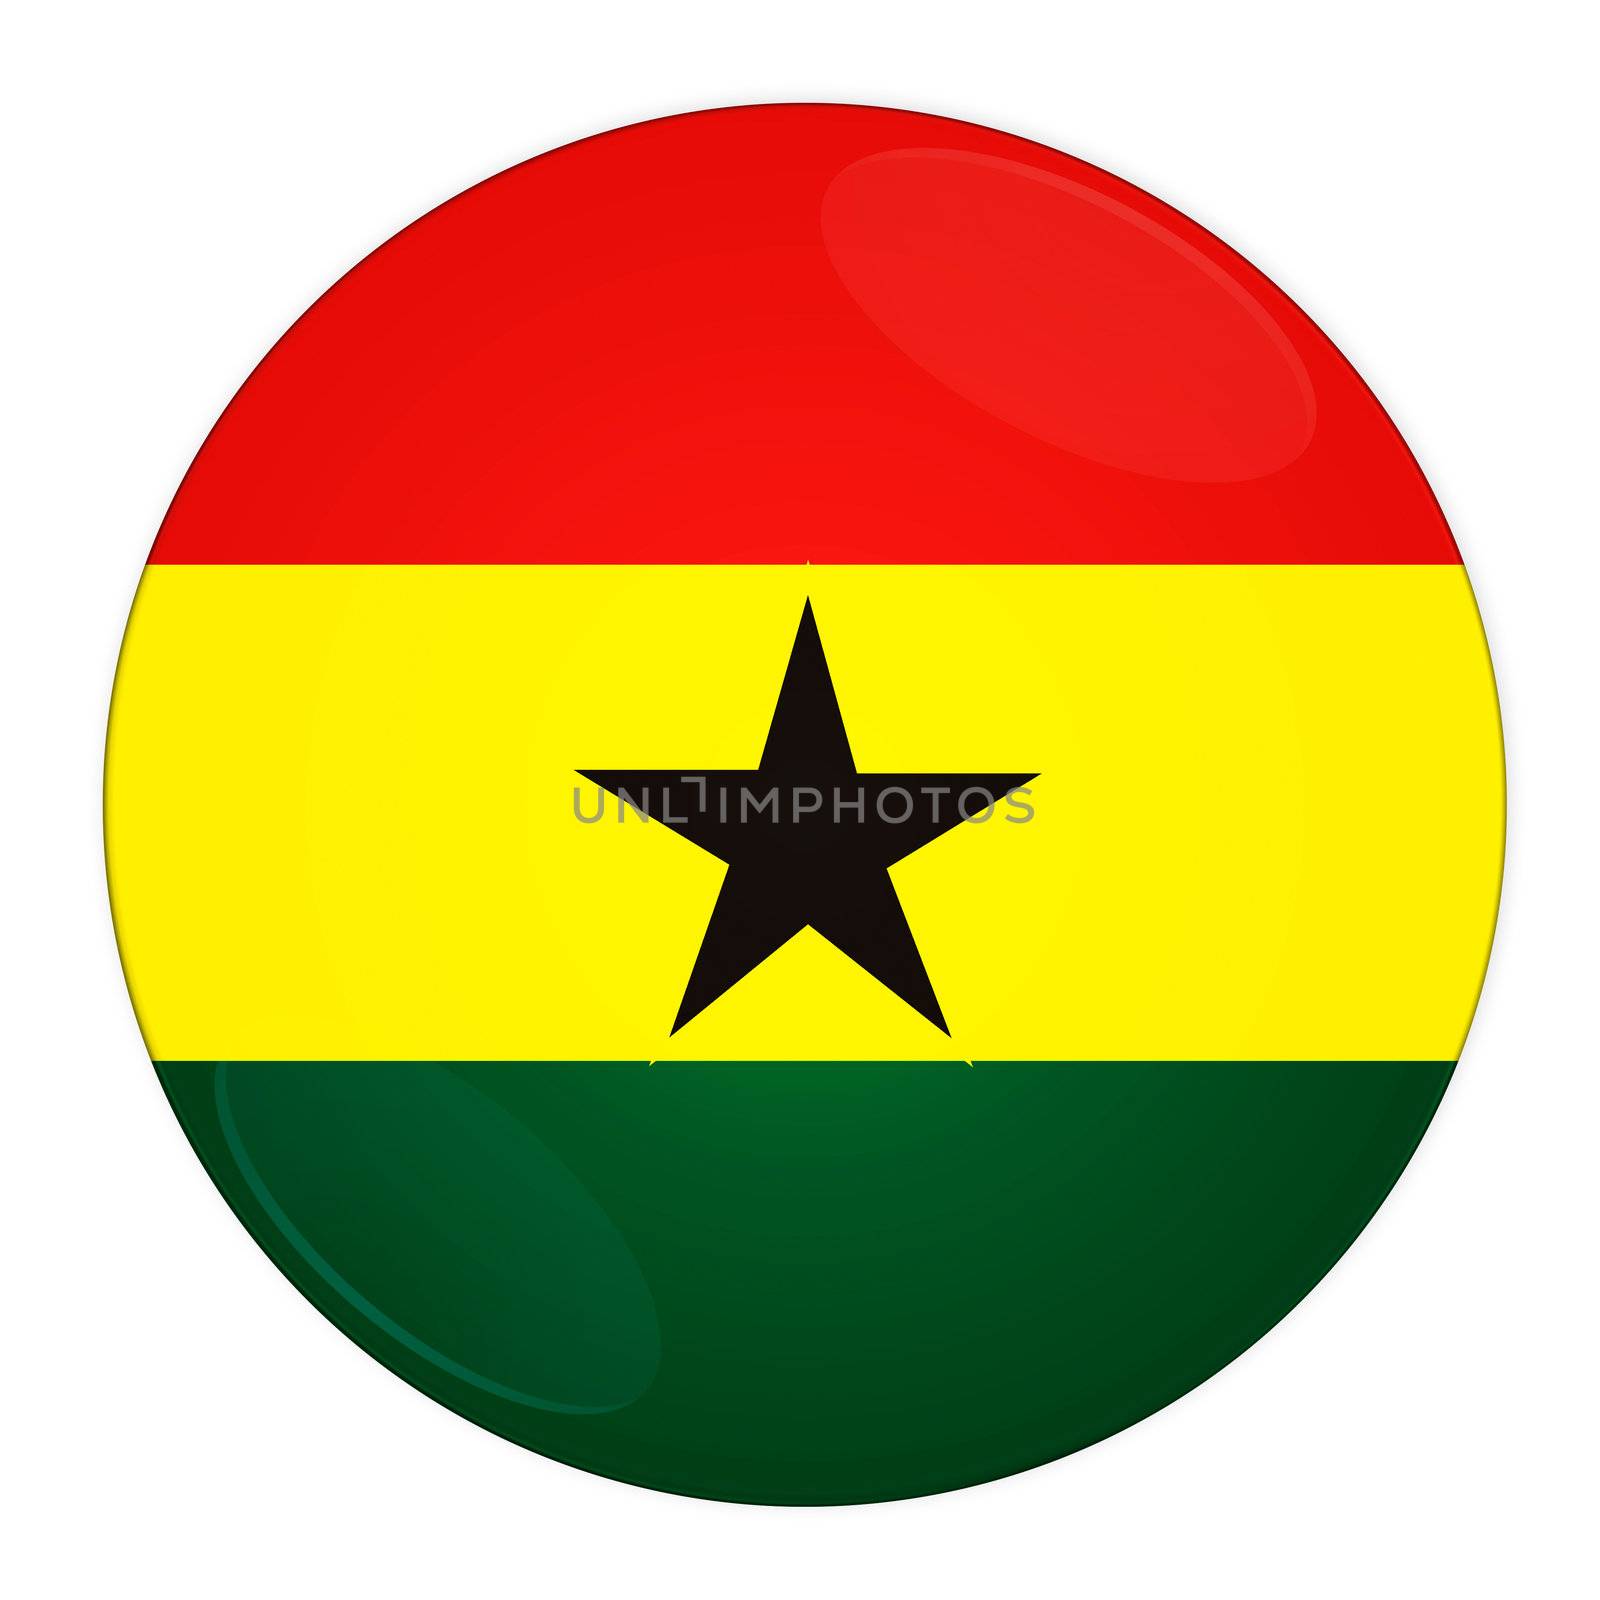 Abstract illustration: button with flag from Ghana  country